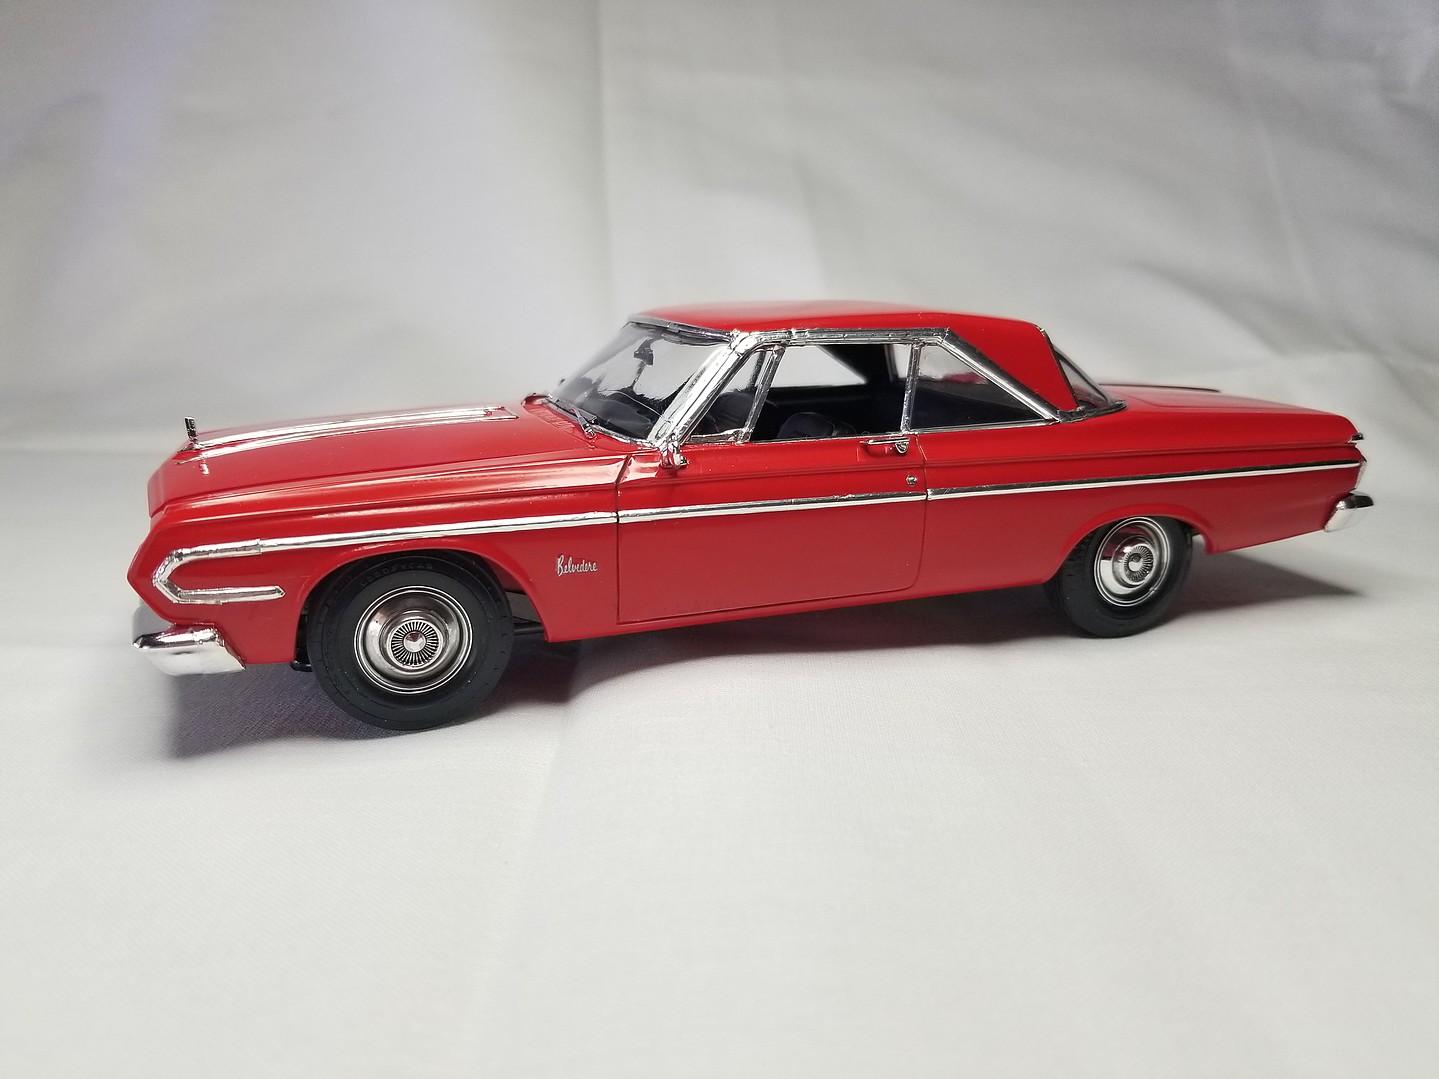 AMT 1964 Plymouth Belvedere Plastic Model Car Vehicle Kit Scale 1 